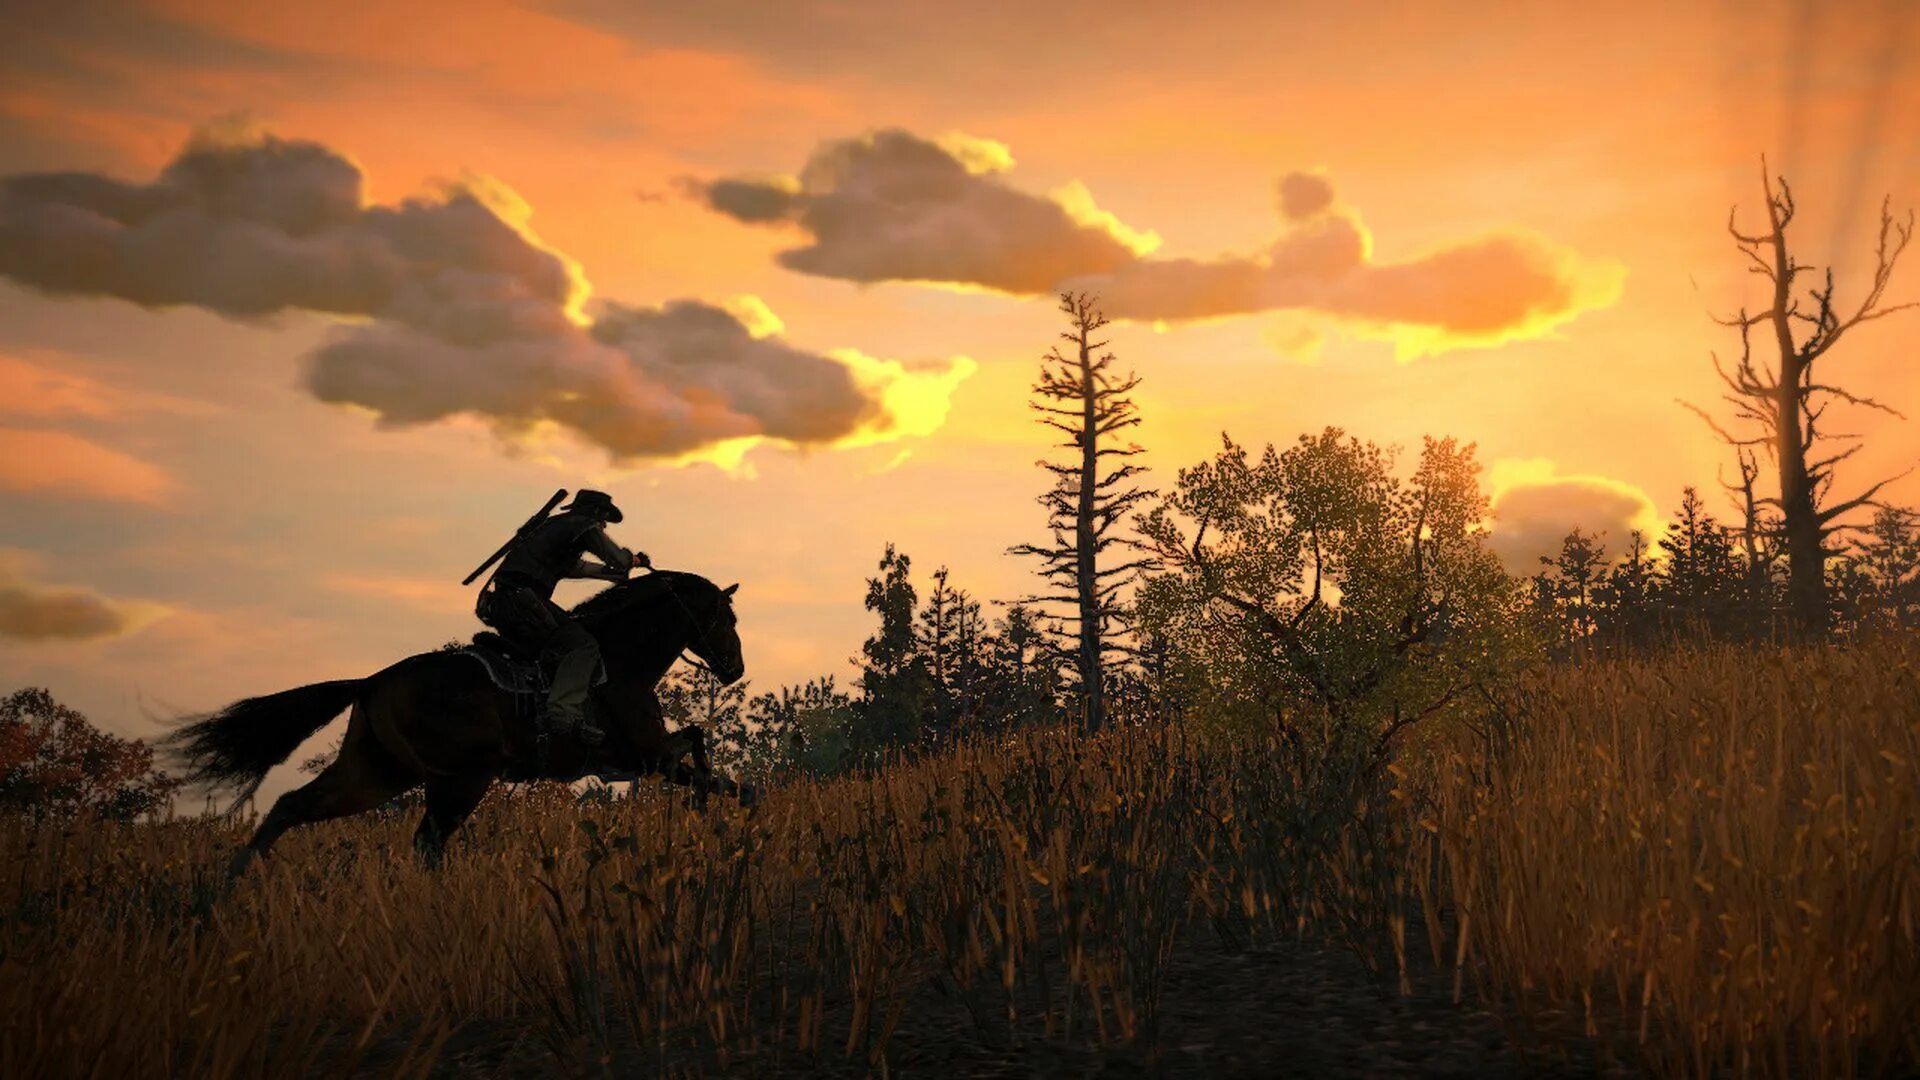 Rdr 2 Xbox 360. Red Dead Redemption 1. Red Dead Redemption 2010. Red Dead Redemption 2 Sunset.